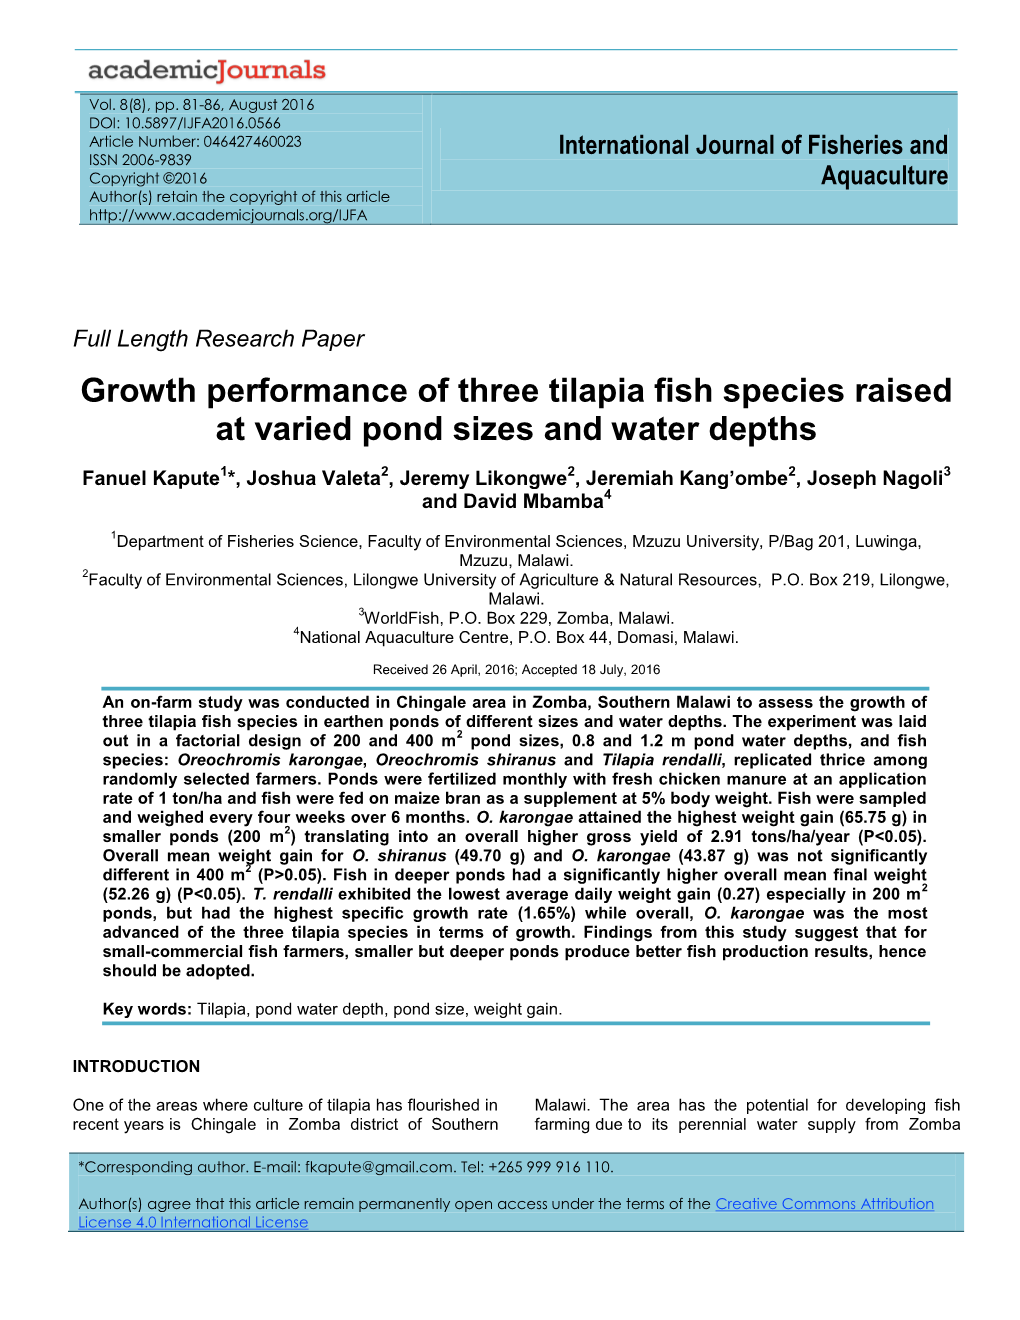 Growth Performance of Three Tilapia Fish Species Raised at Varied Pond Sizes and Water Depths